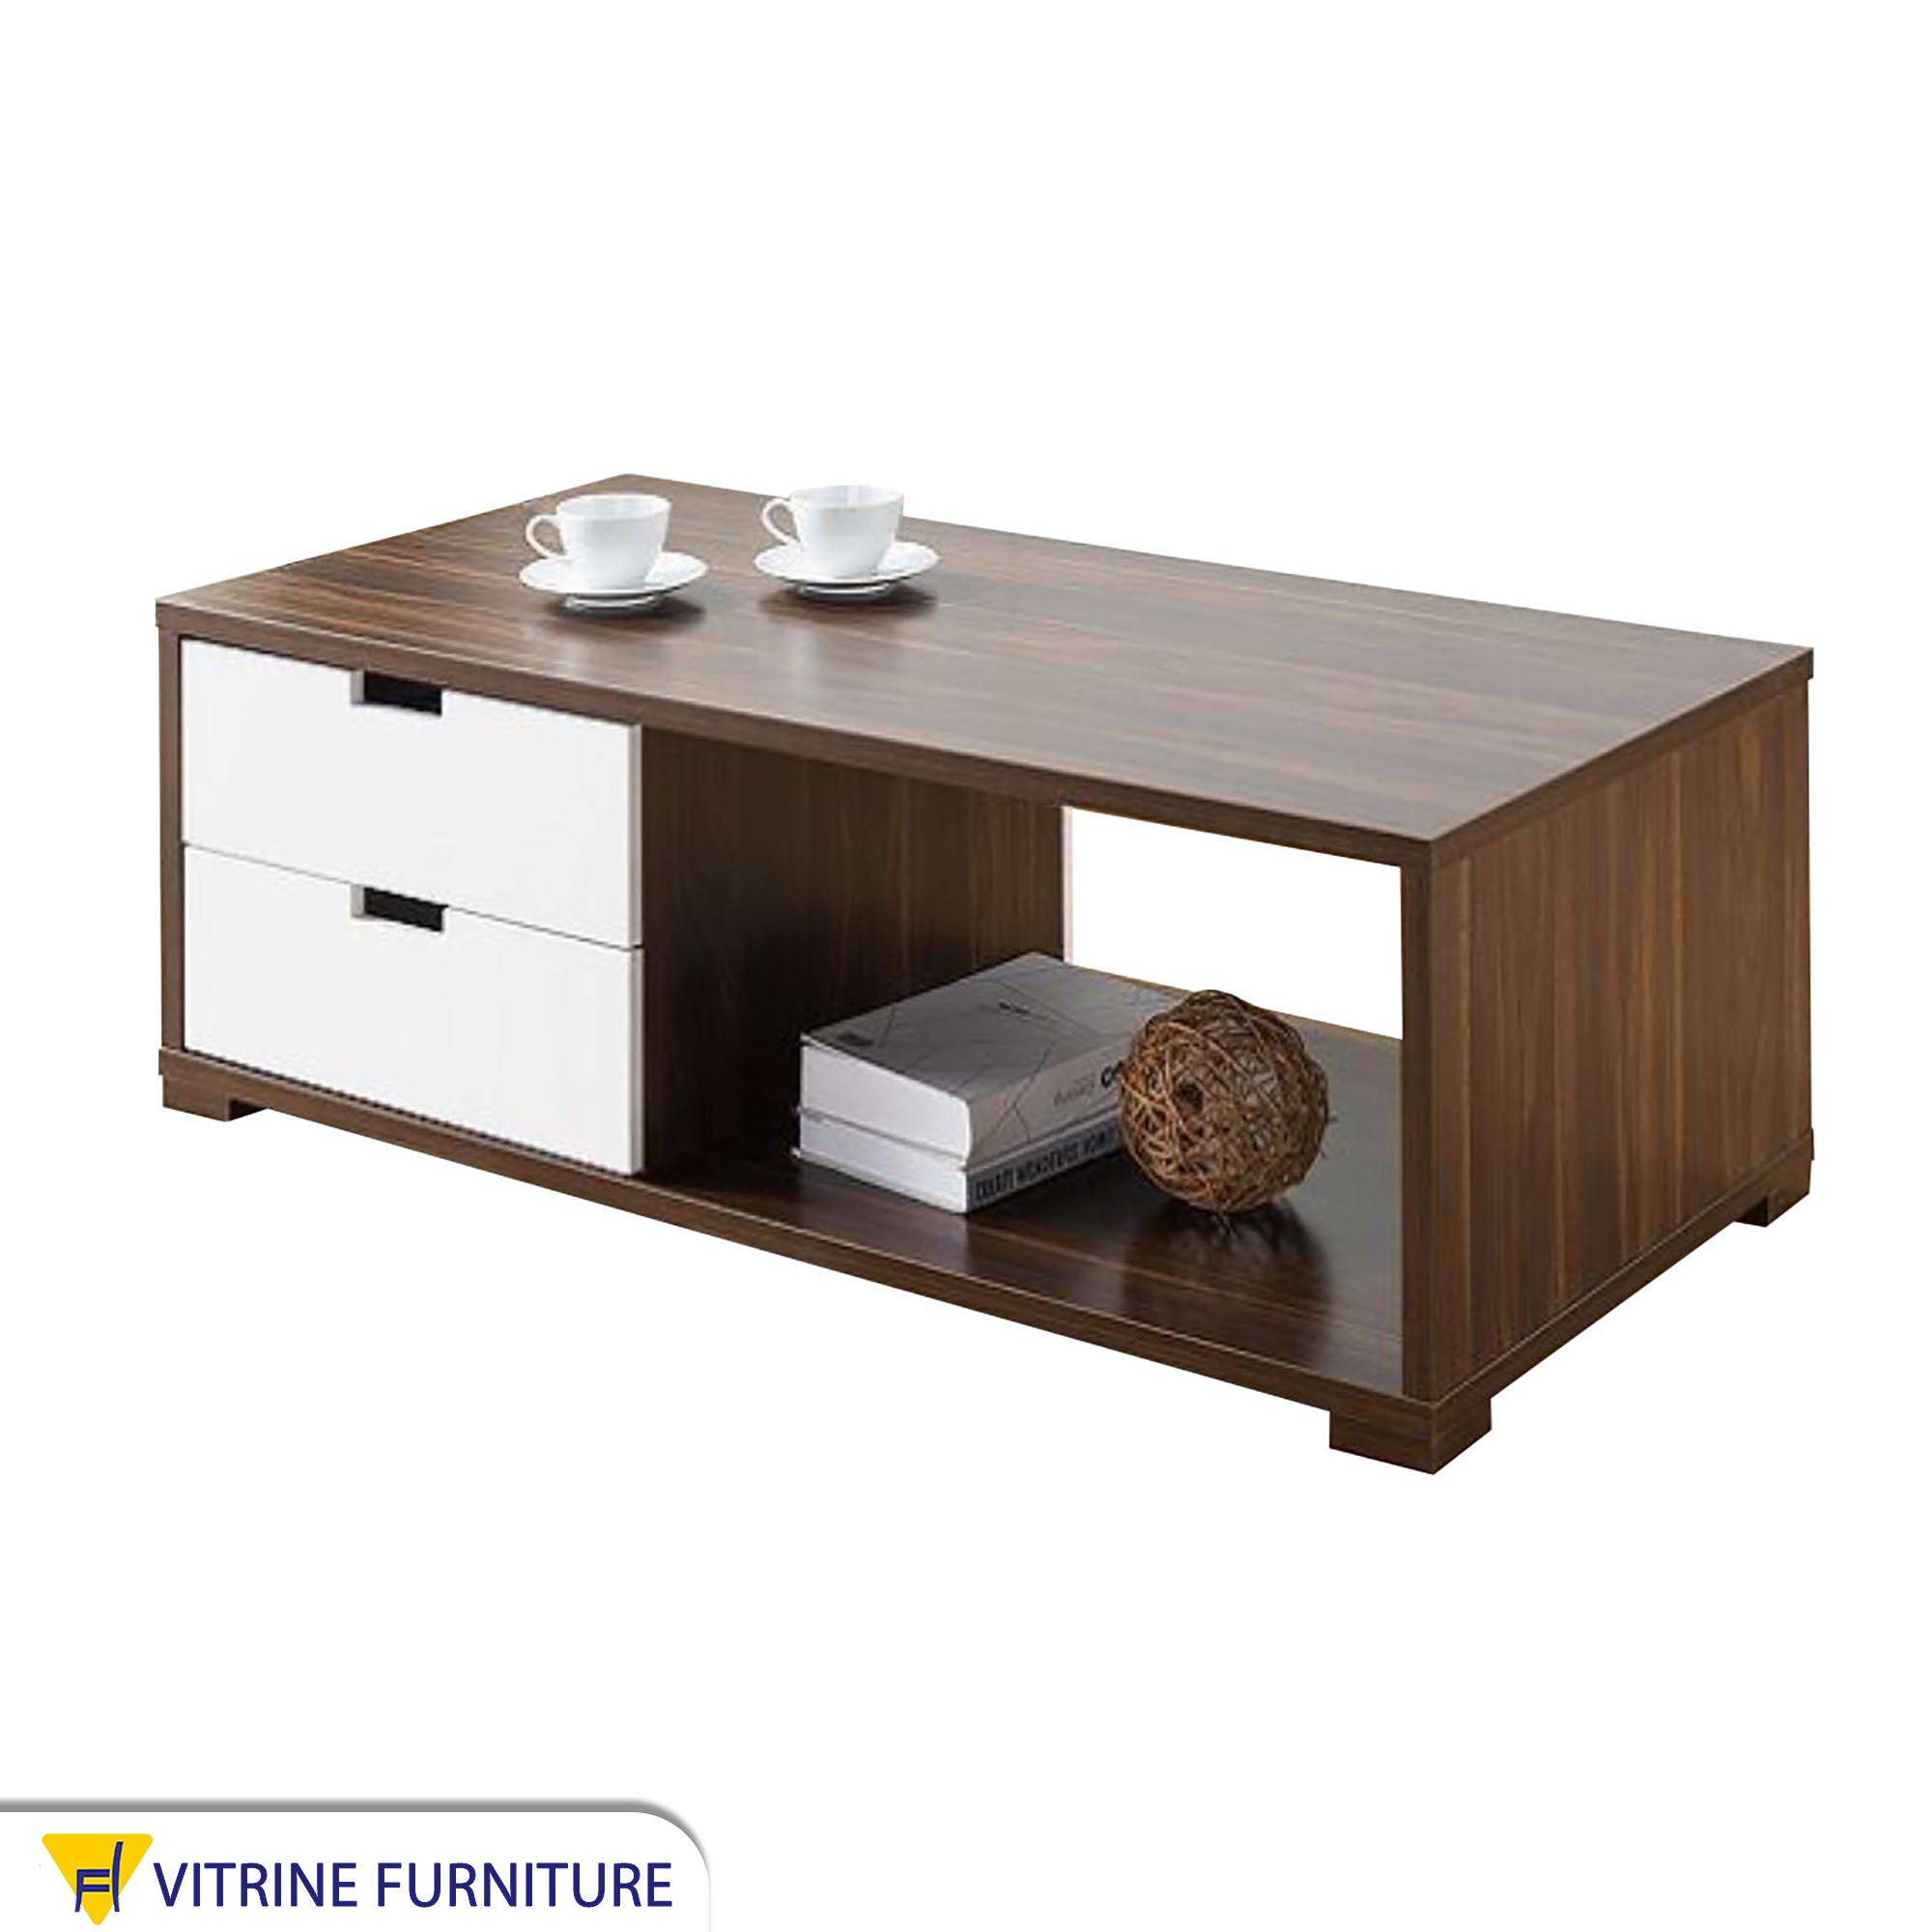 White and chocolate brown center table